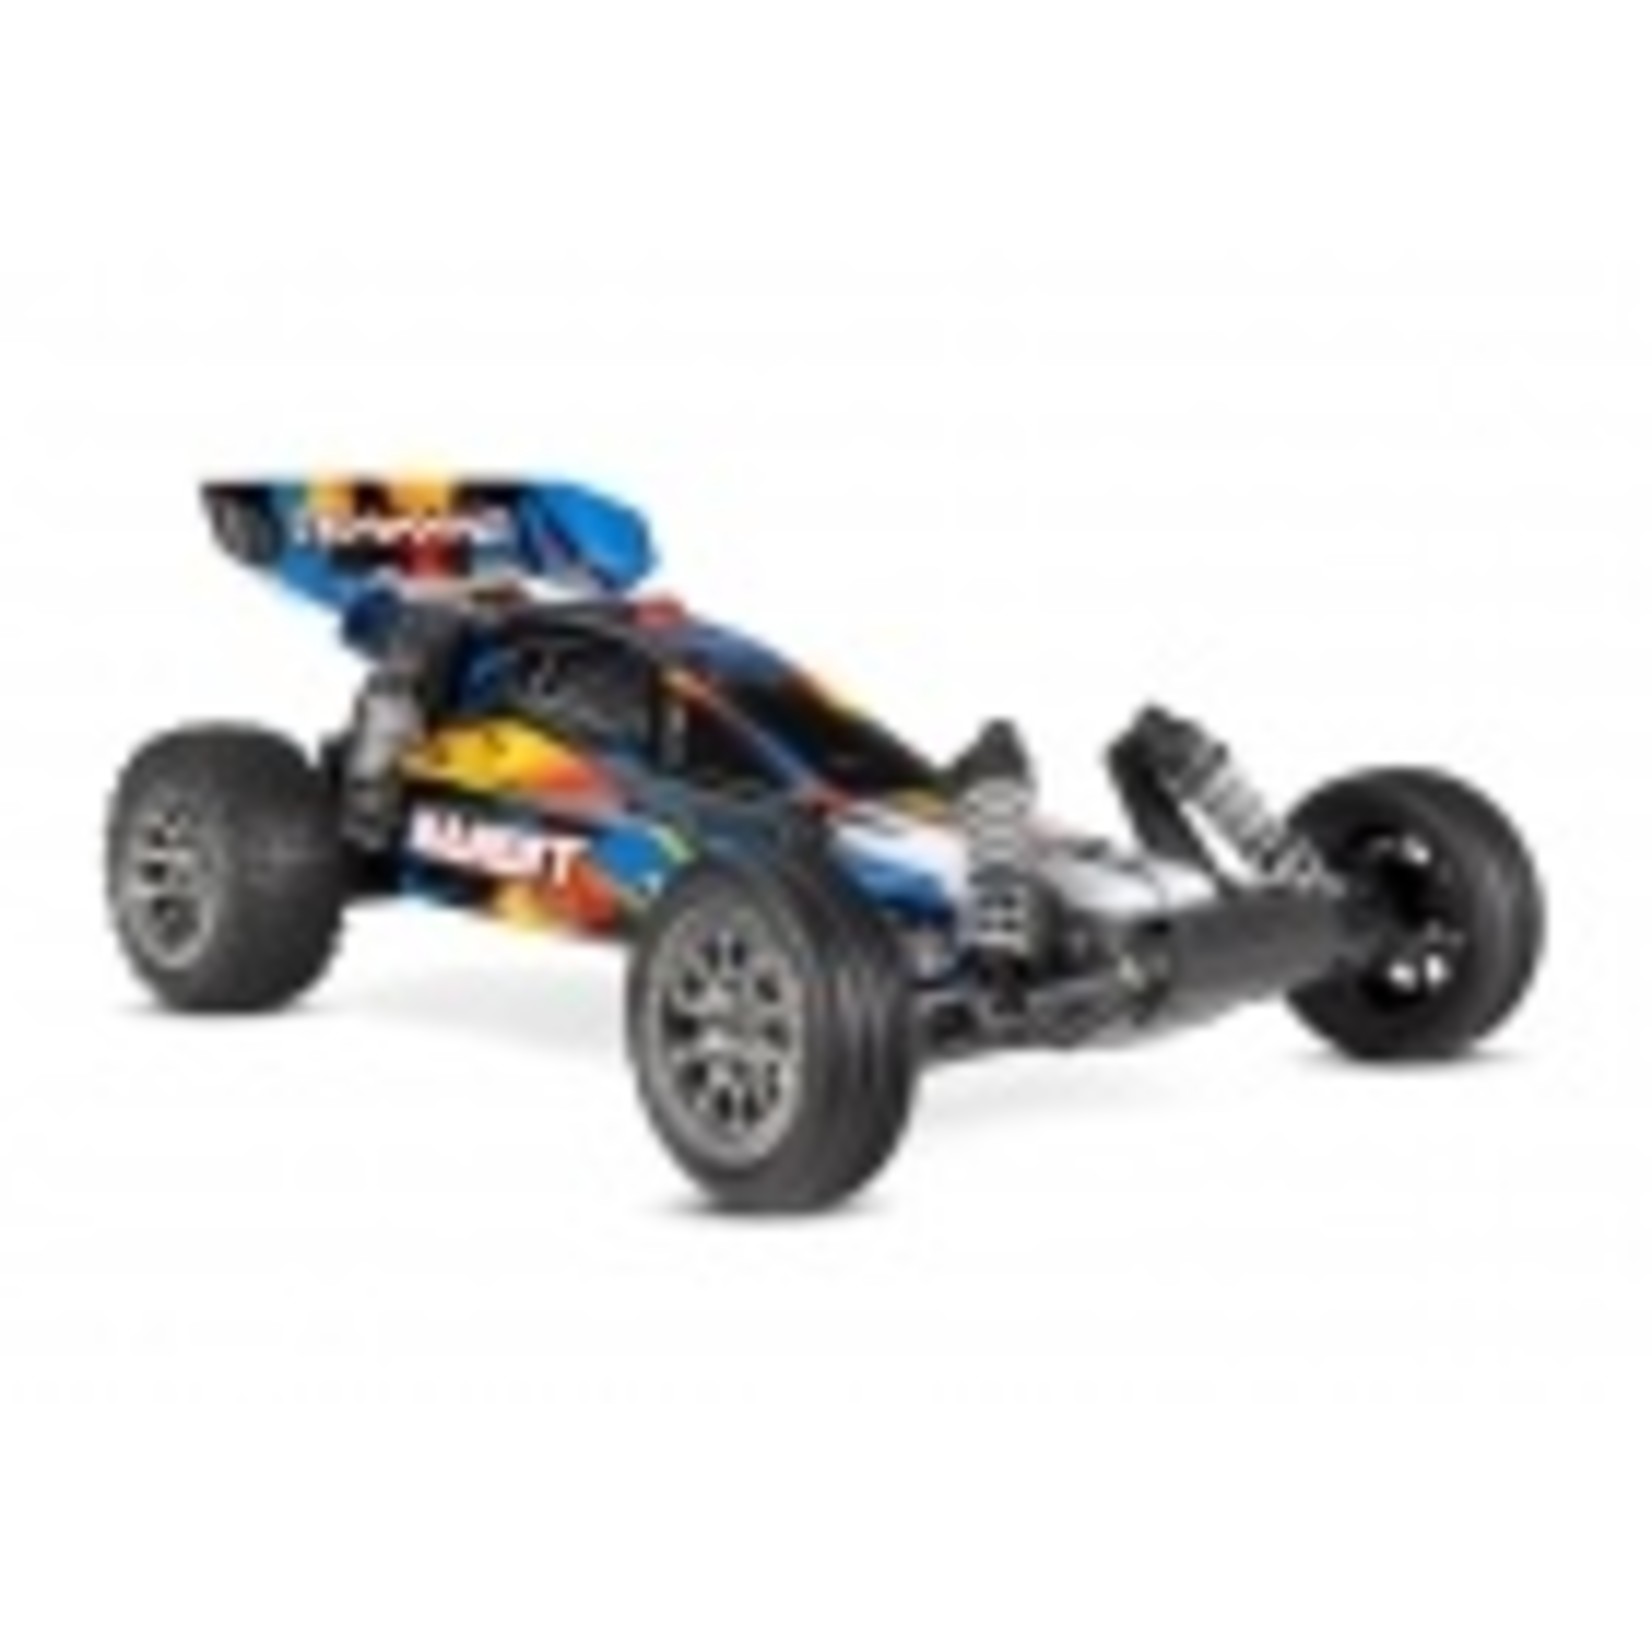 Traxxas 24076-74-BLU Bandit® VXL:  1/10 Scale Off-Road Buggy with TQi™ Traxxas Link™ Enabled 2.4GHz Radio System & Traxxas Stability Management (TSM)®